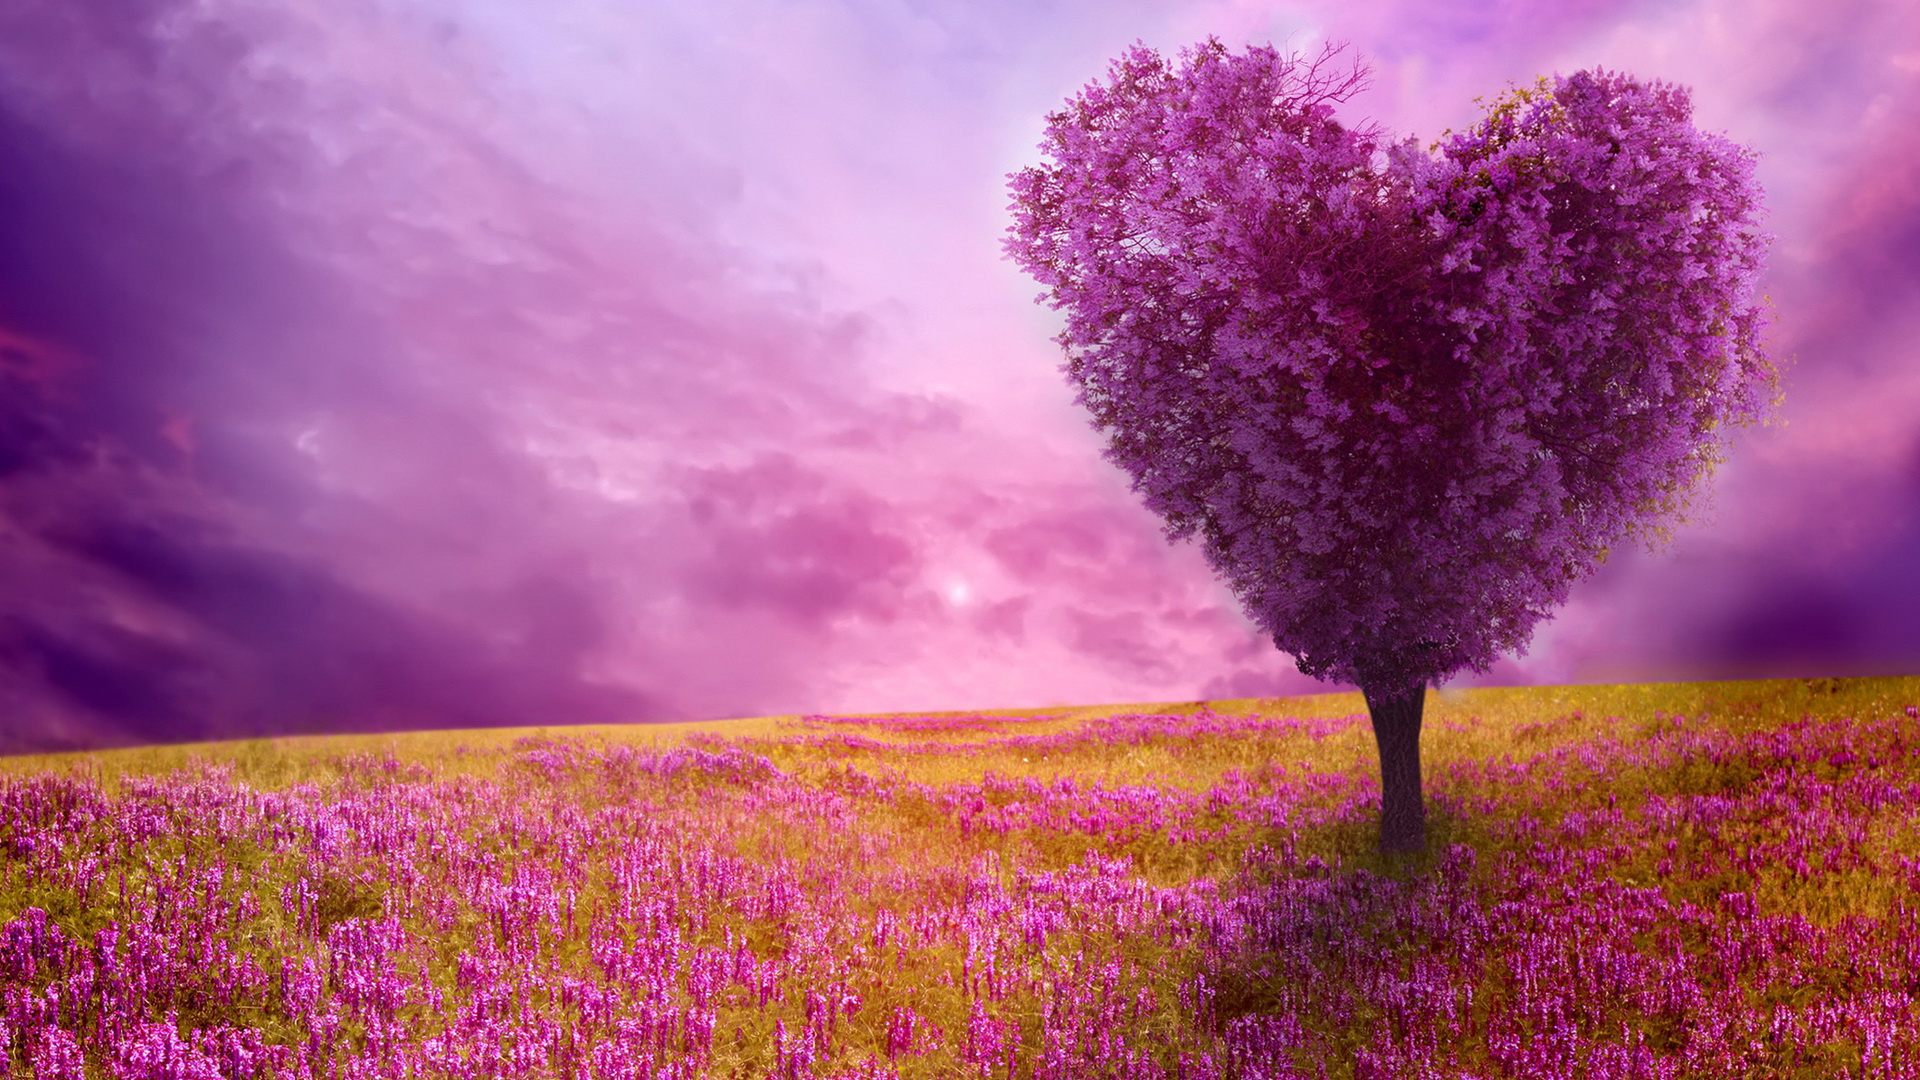 Spring nature background 1920x1080